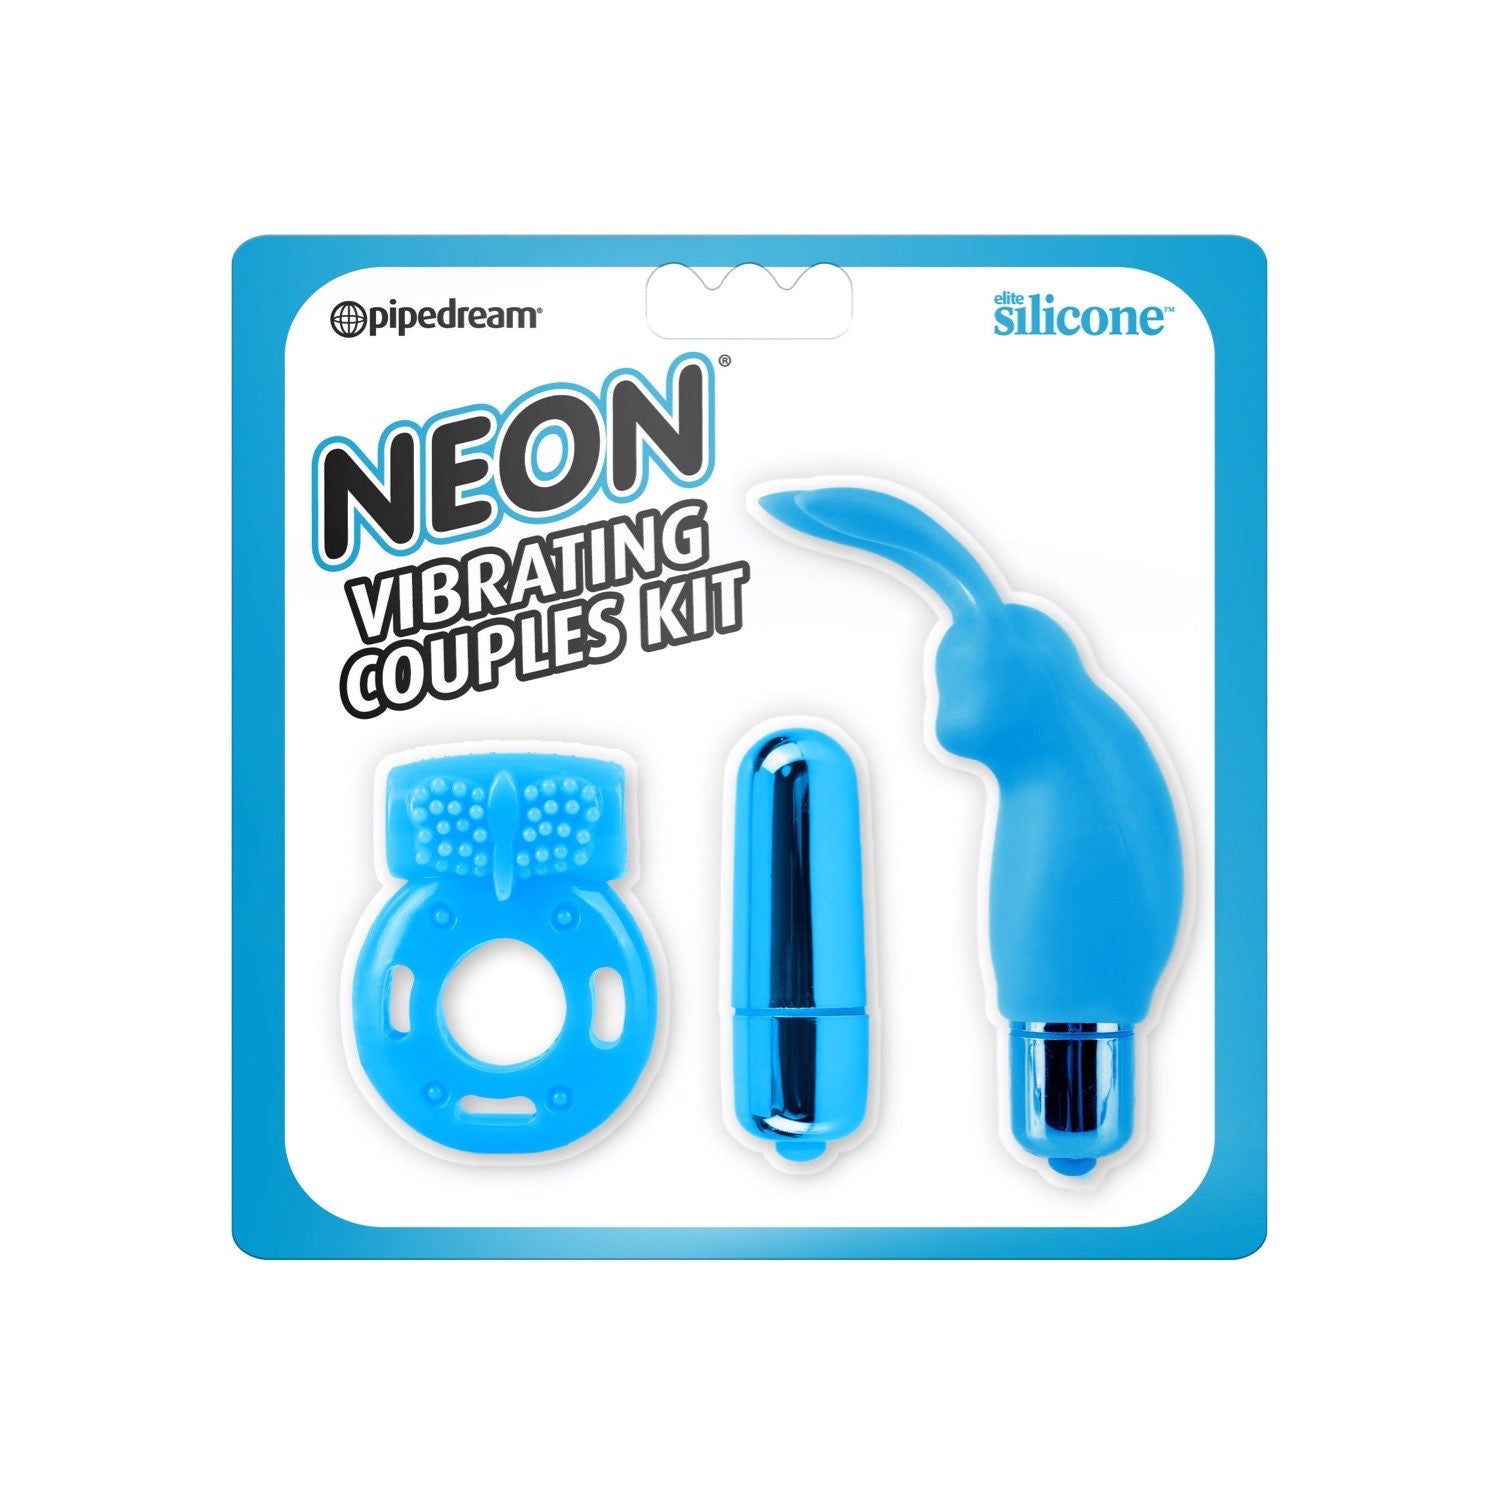  Neon Vibrating Couples Kit - Blue - 3 Piece Set by Pipedream